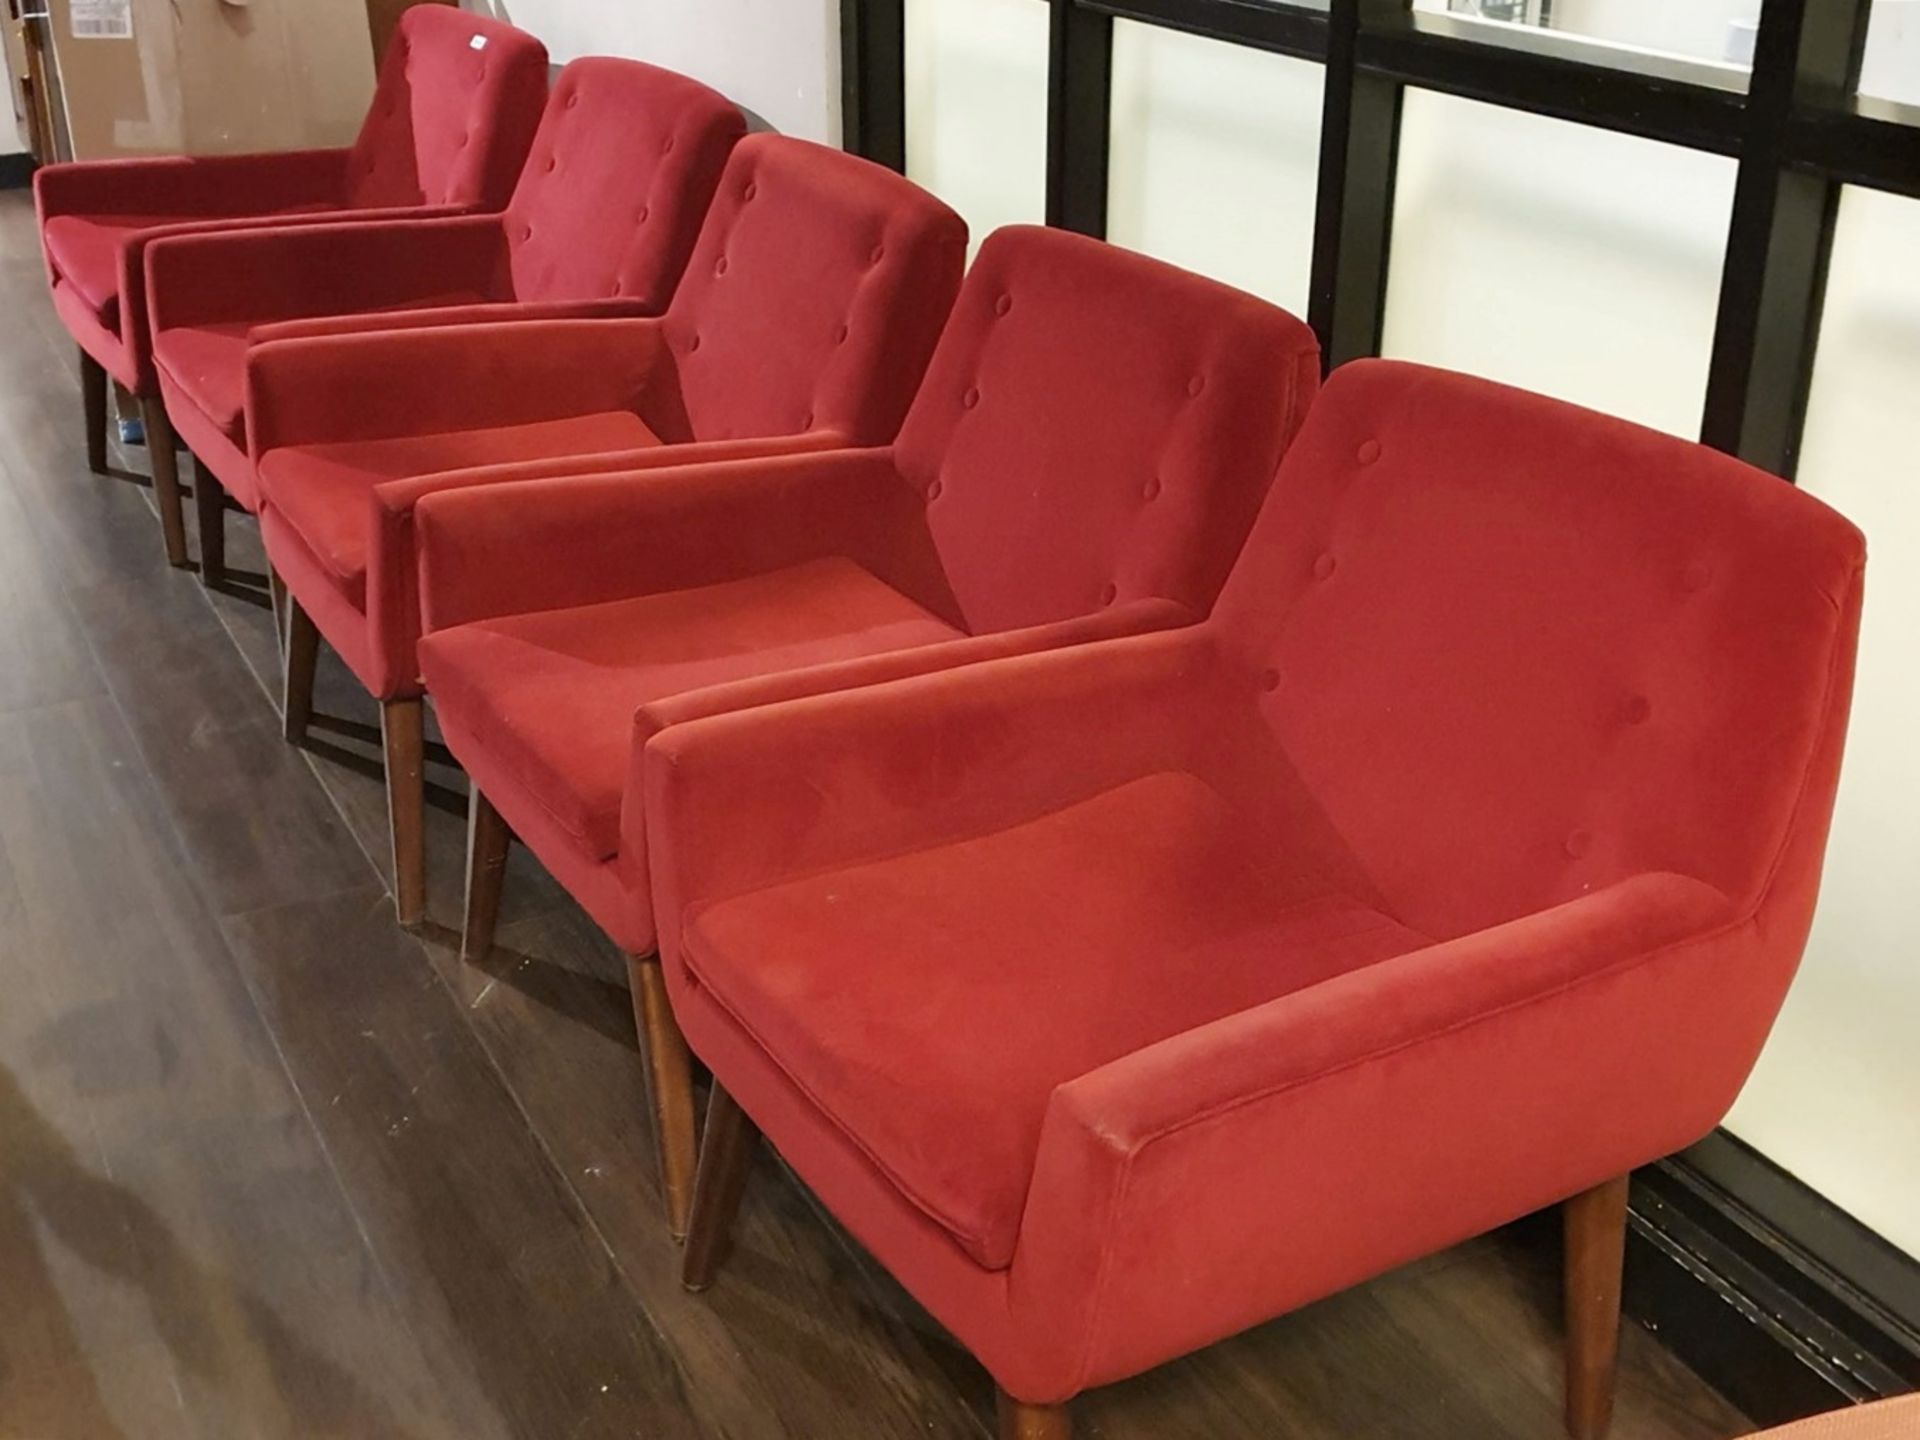 5 x Retro Style Armchairs in Red Fabric - H80/45 x W68 x D70 cms - Ref PA136 - CL463 - Location: - Image 2 of 3